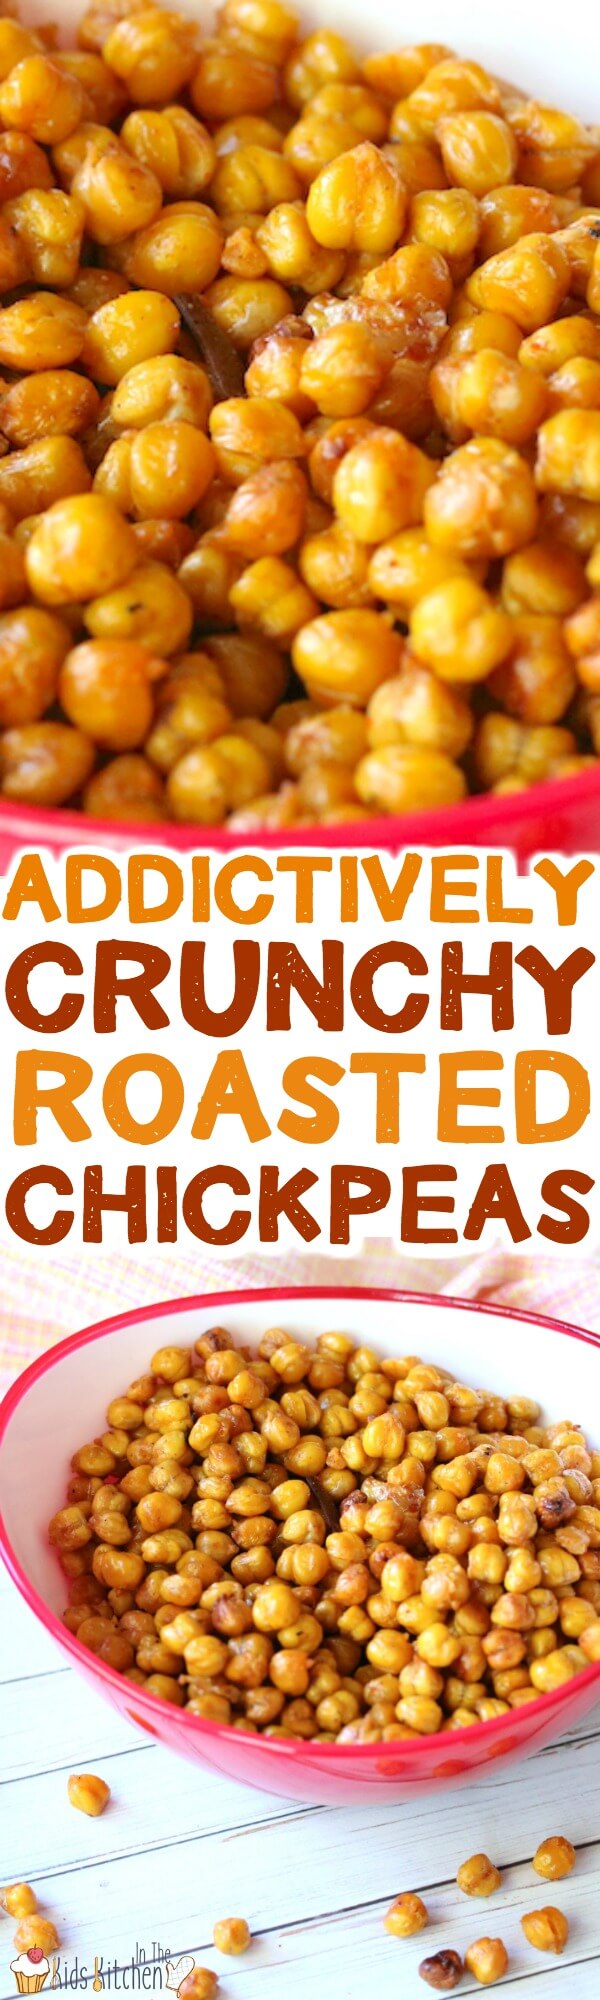 A healthy alternative to chips, your kids will love these crunchy roasted chickpeas snack! Easy to make and delicious, lightly salted.